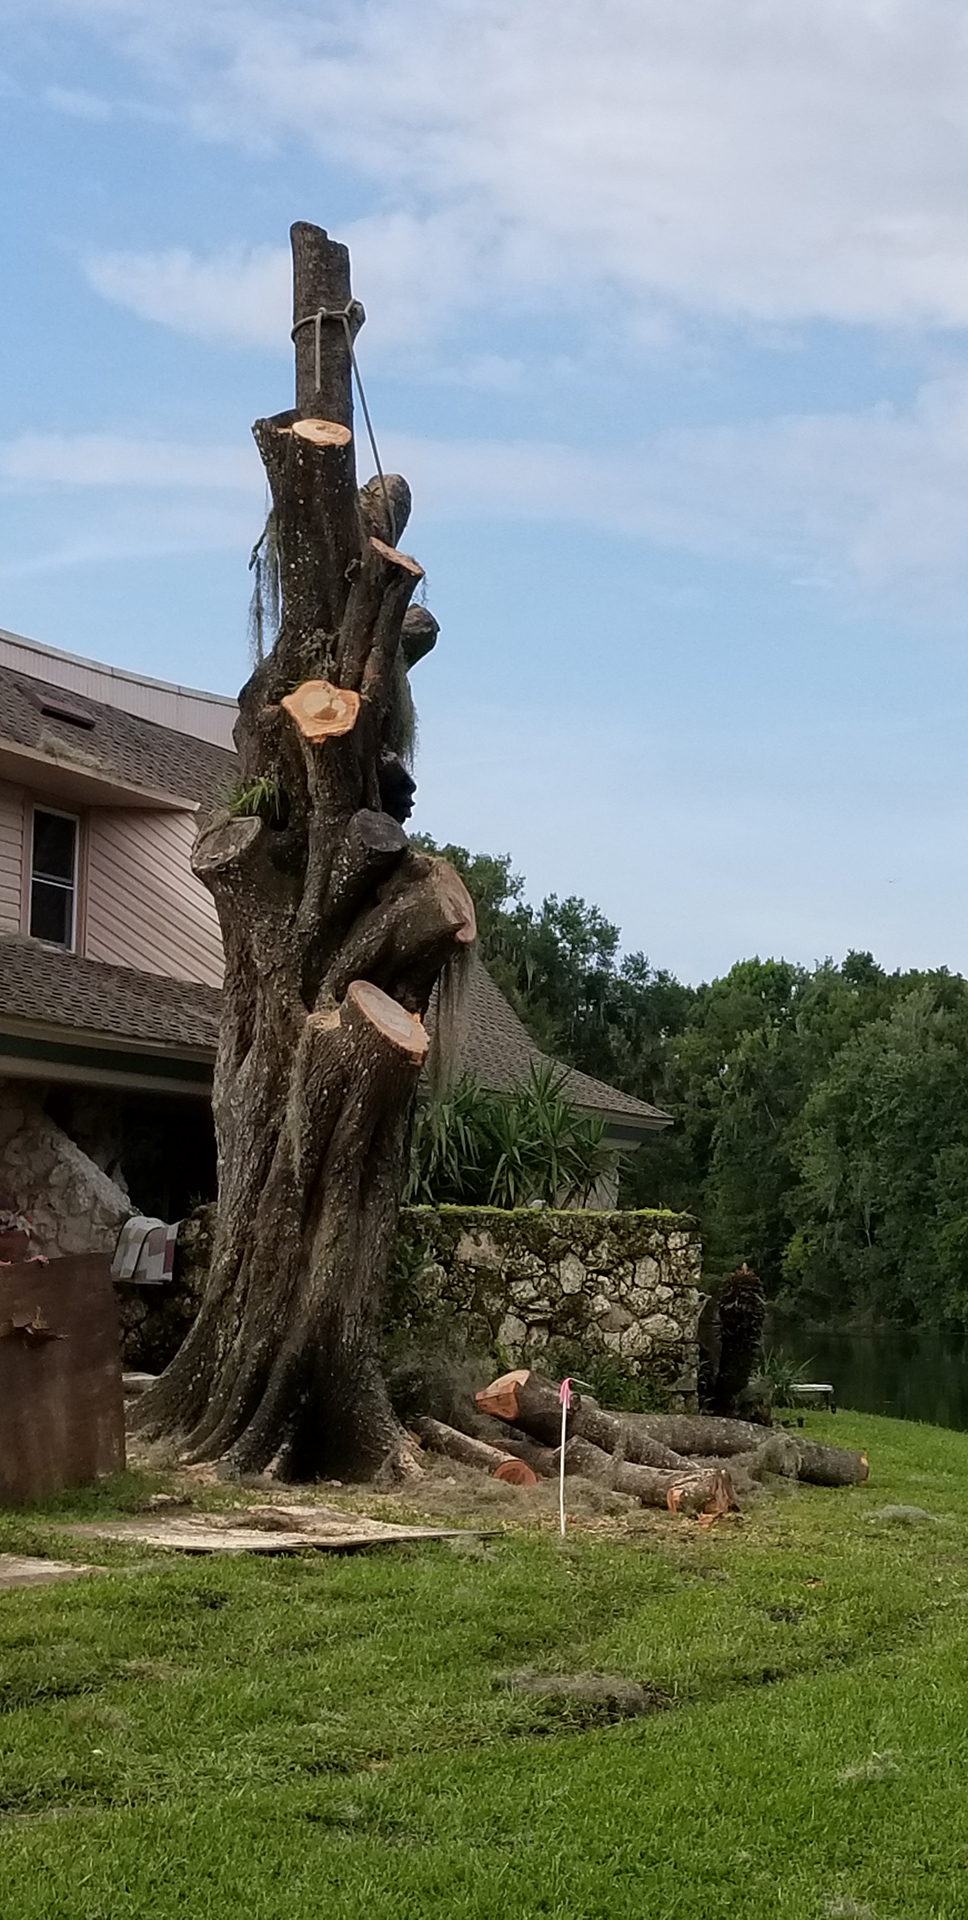 Large tree infested with bees is in the process of being removed.